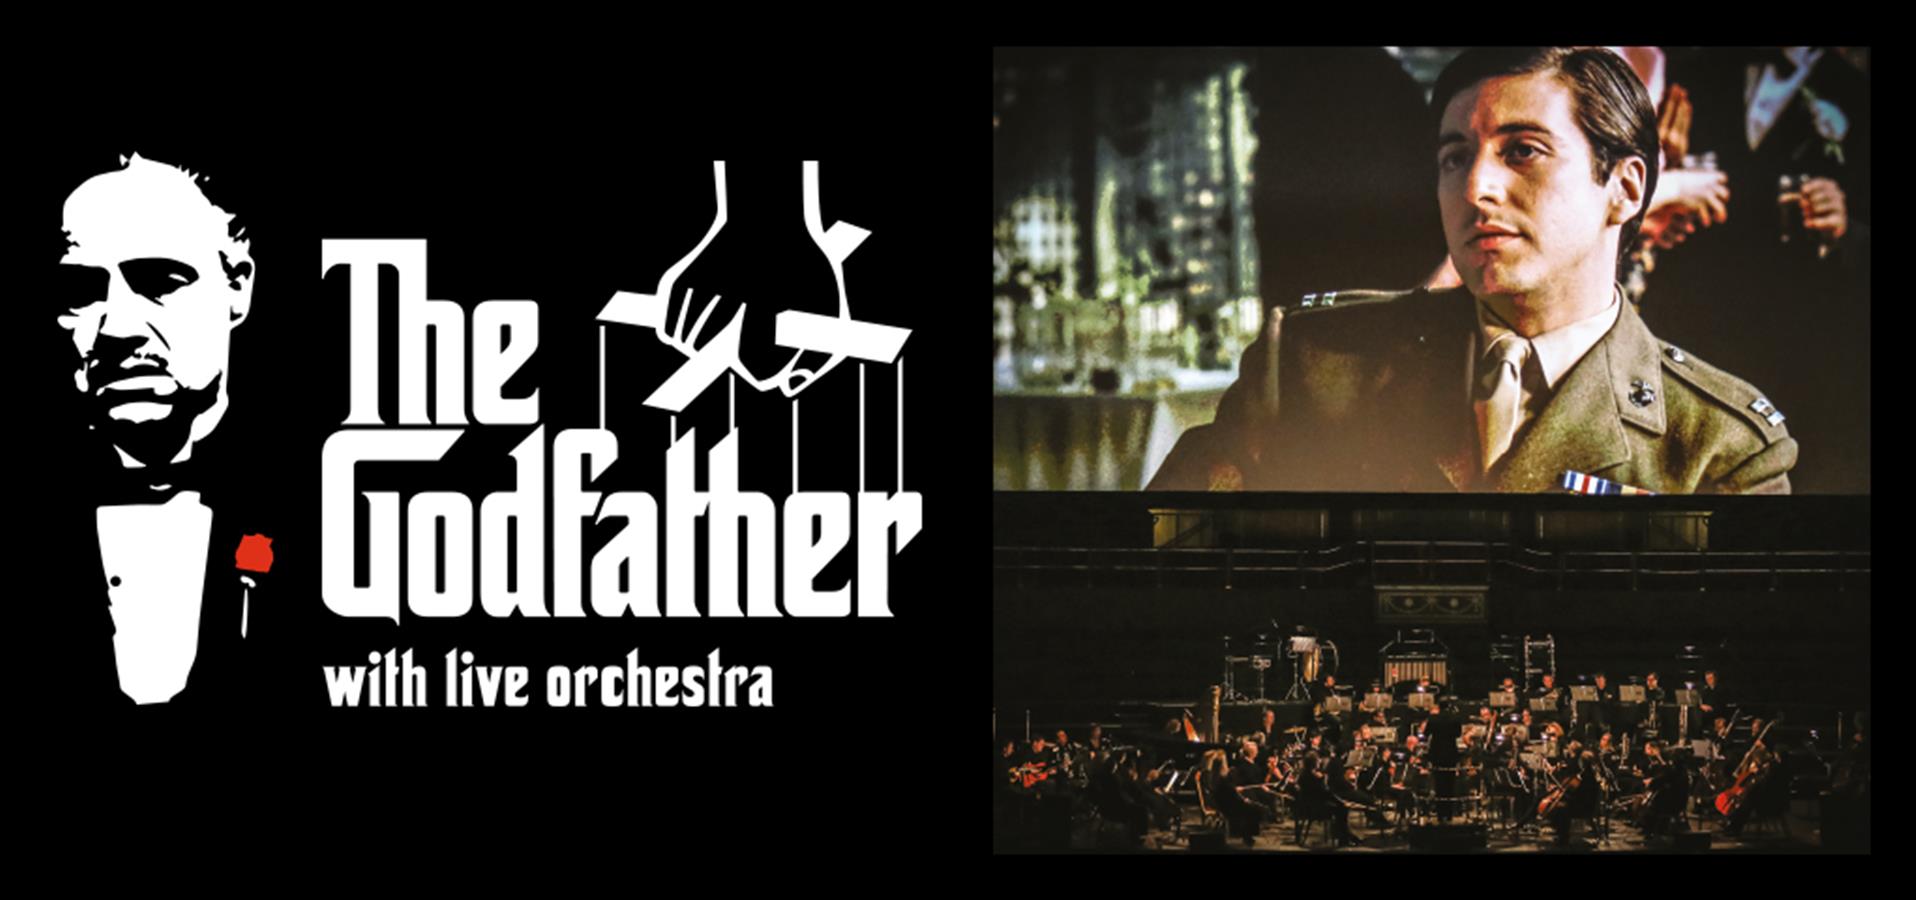 The Godfather Live With 60 Piece Orchestra tickets